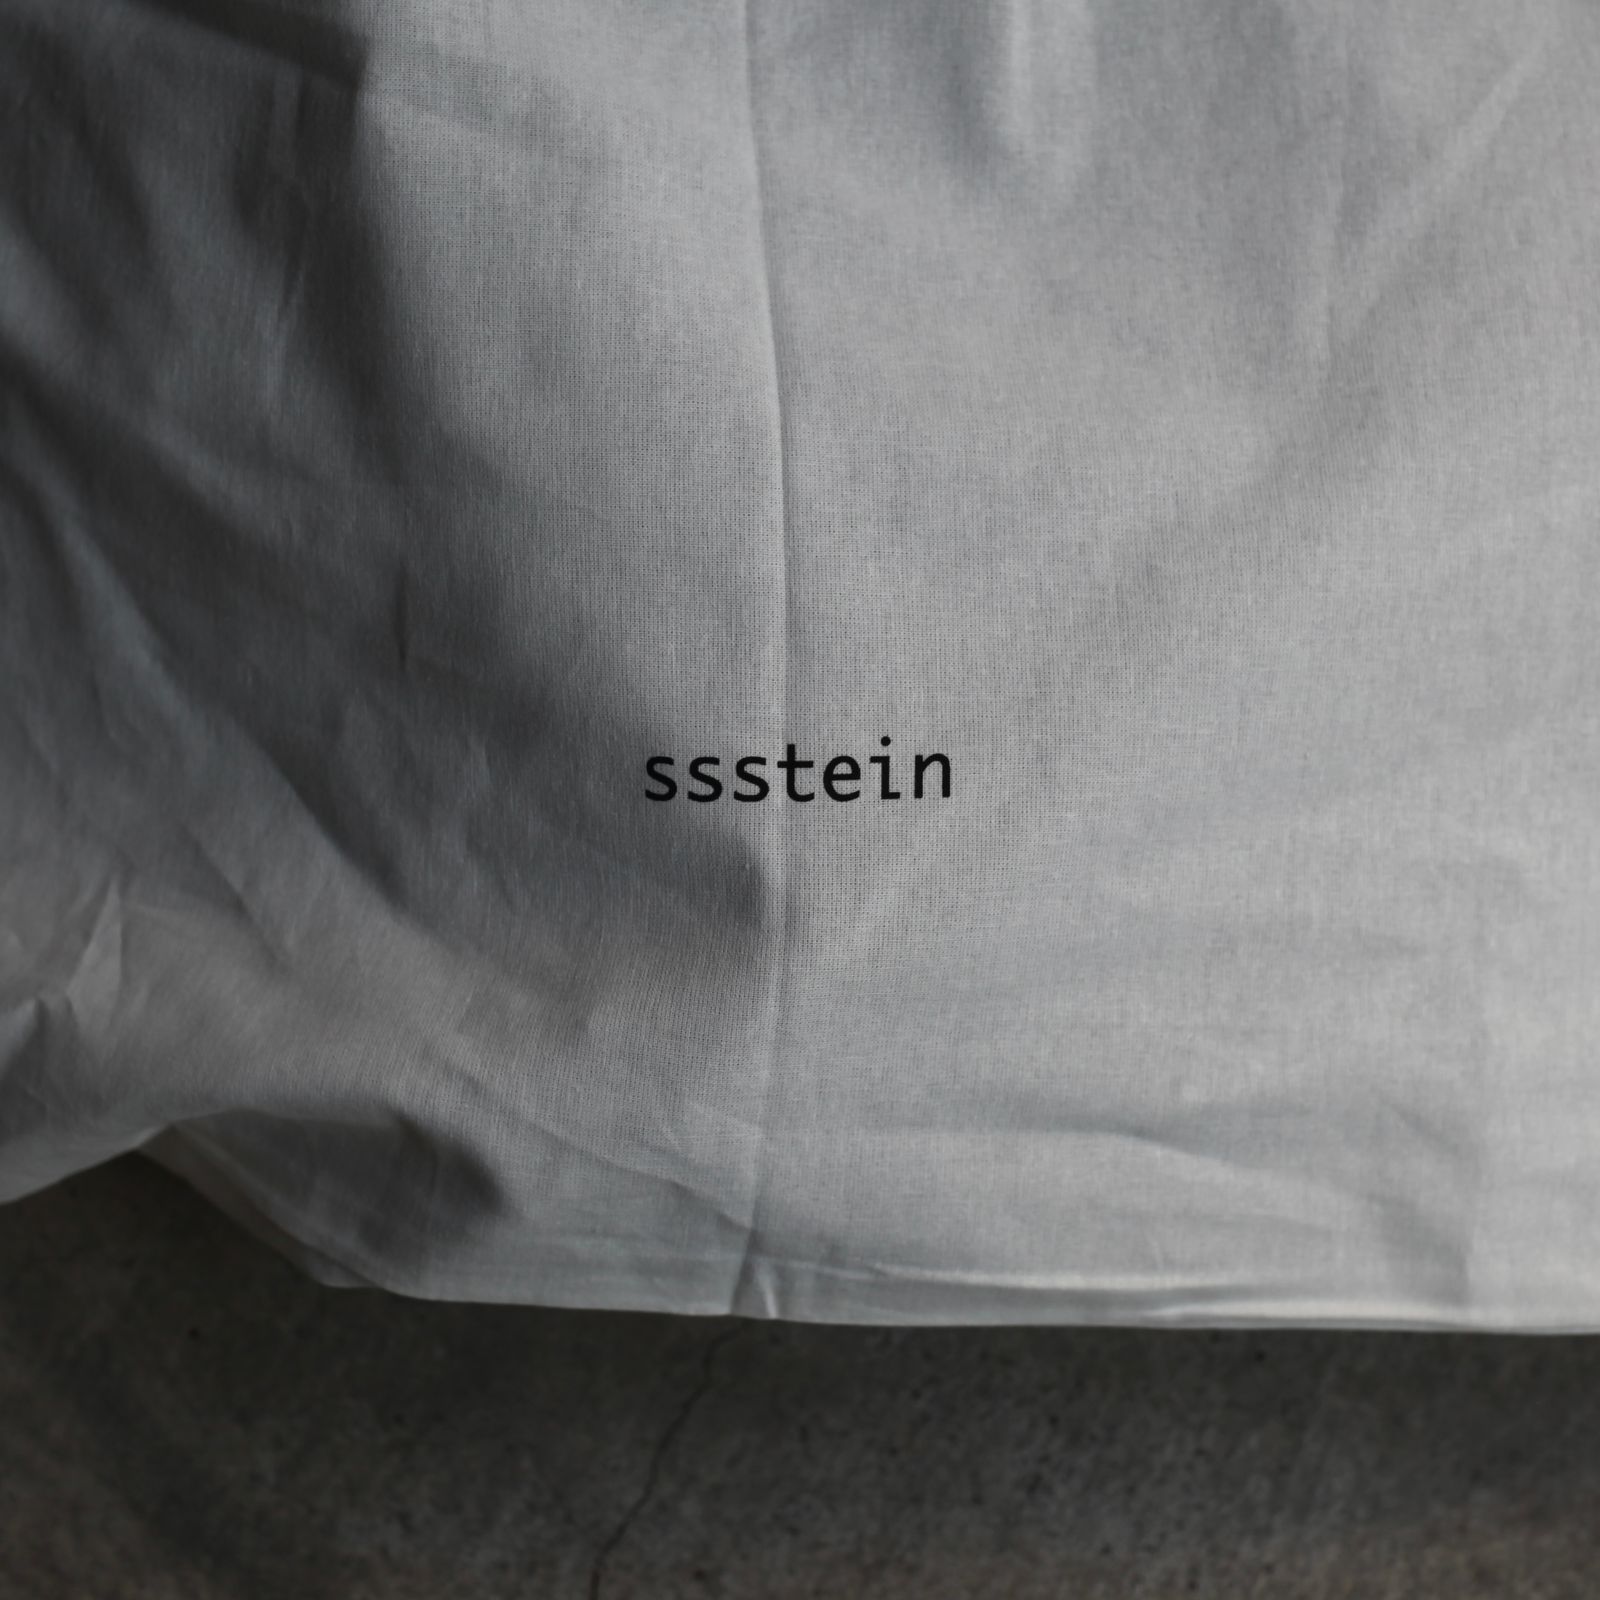 stein - 【残りわずか】Tie Tote Bag(LEATHER) | ACRMTSM ONLINE 